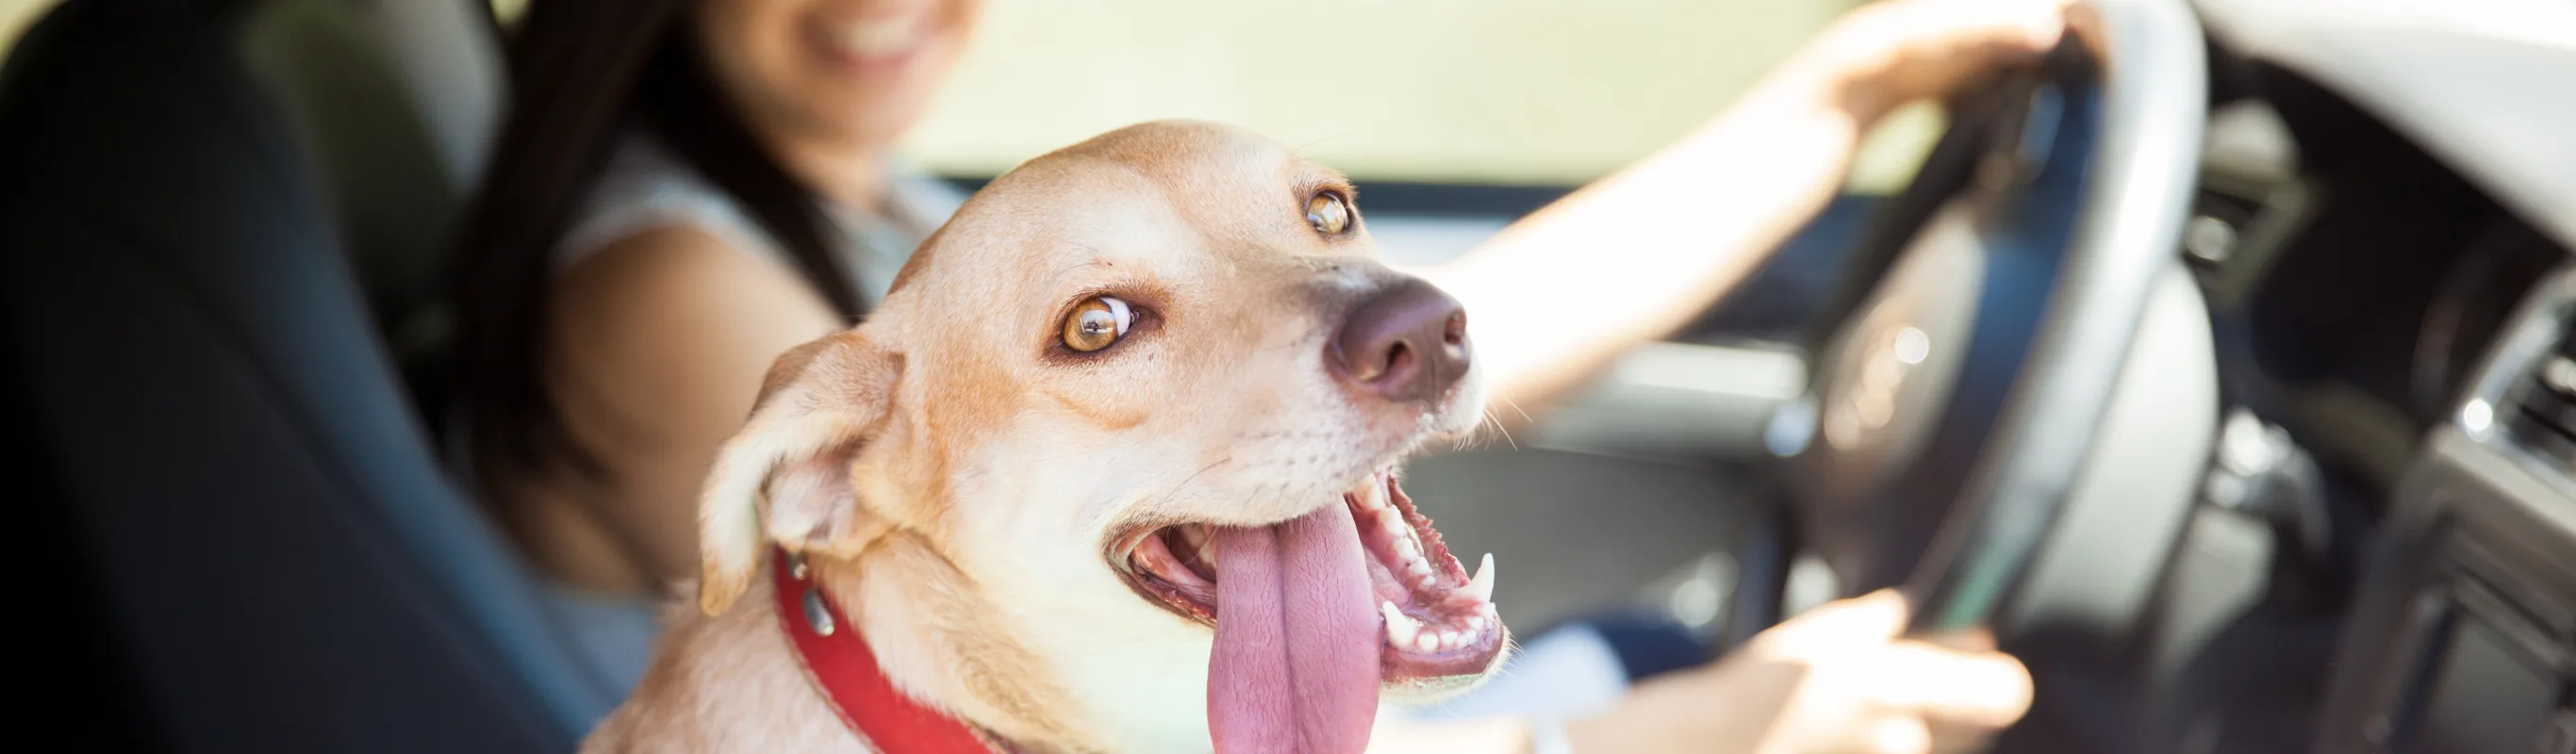 Dog in car with tongue out